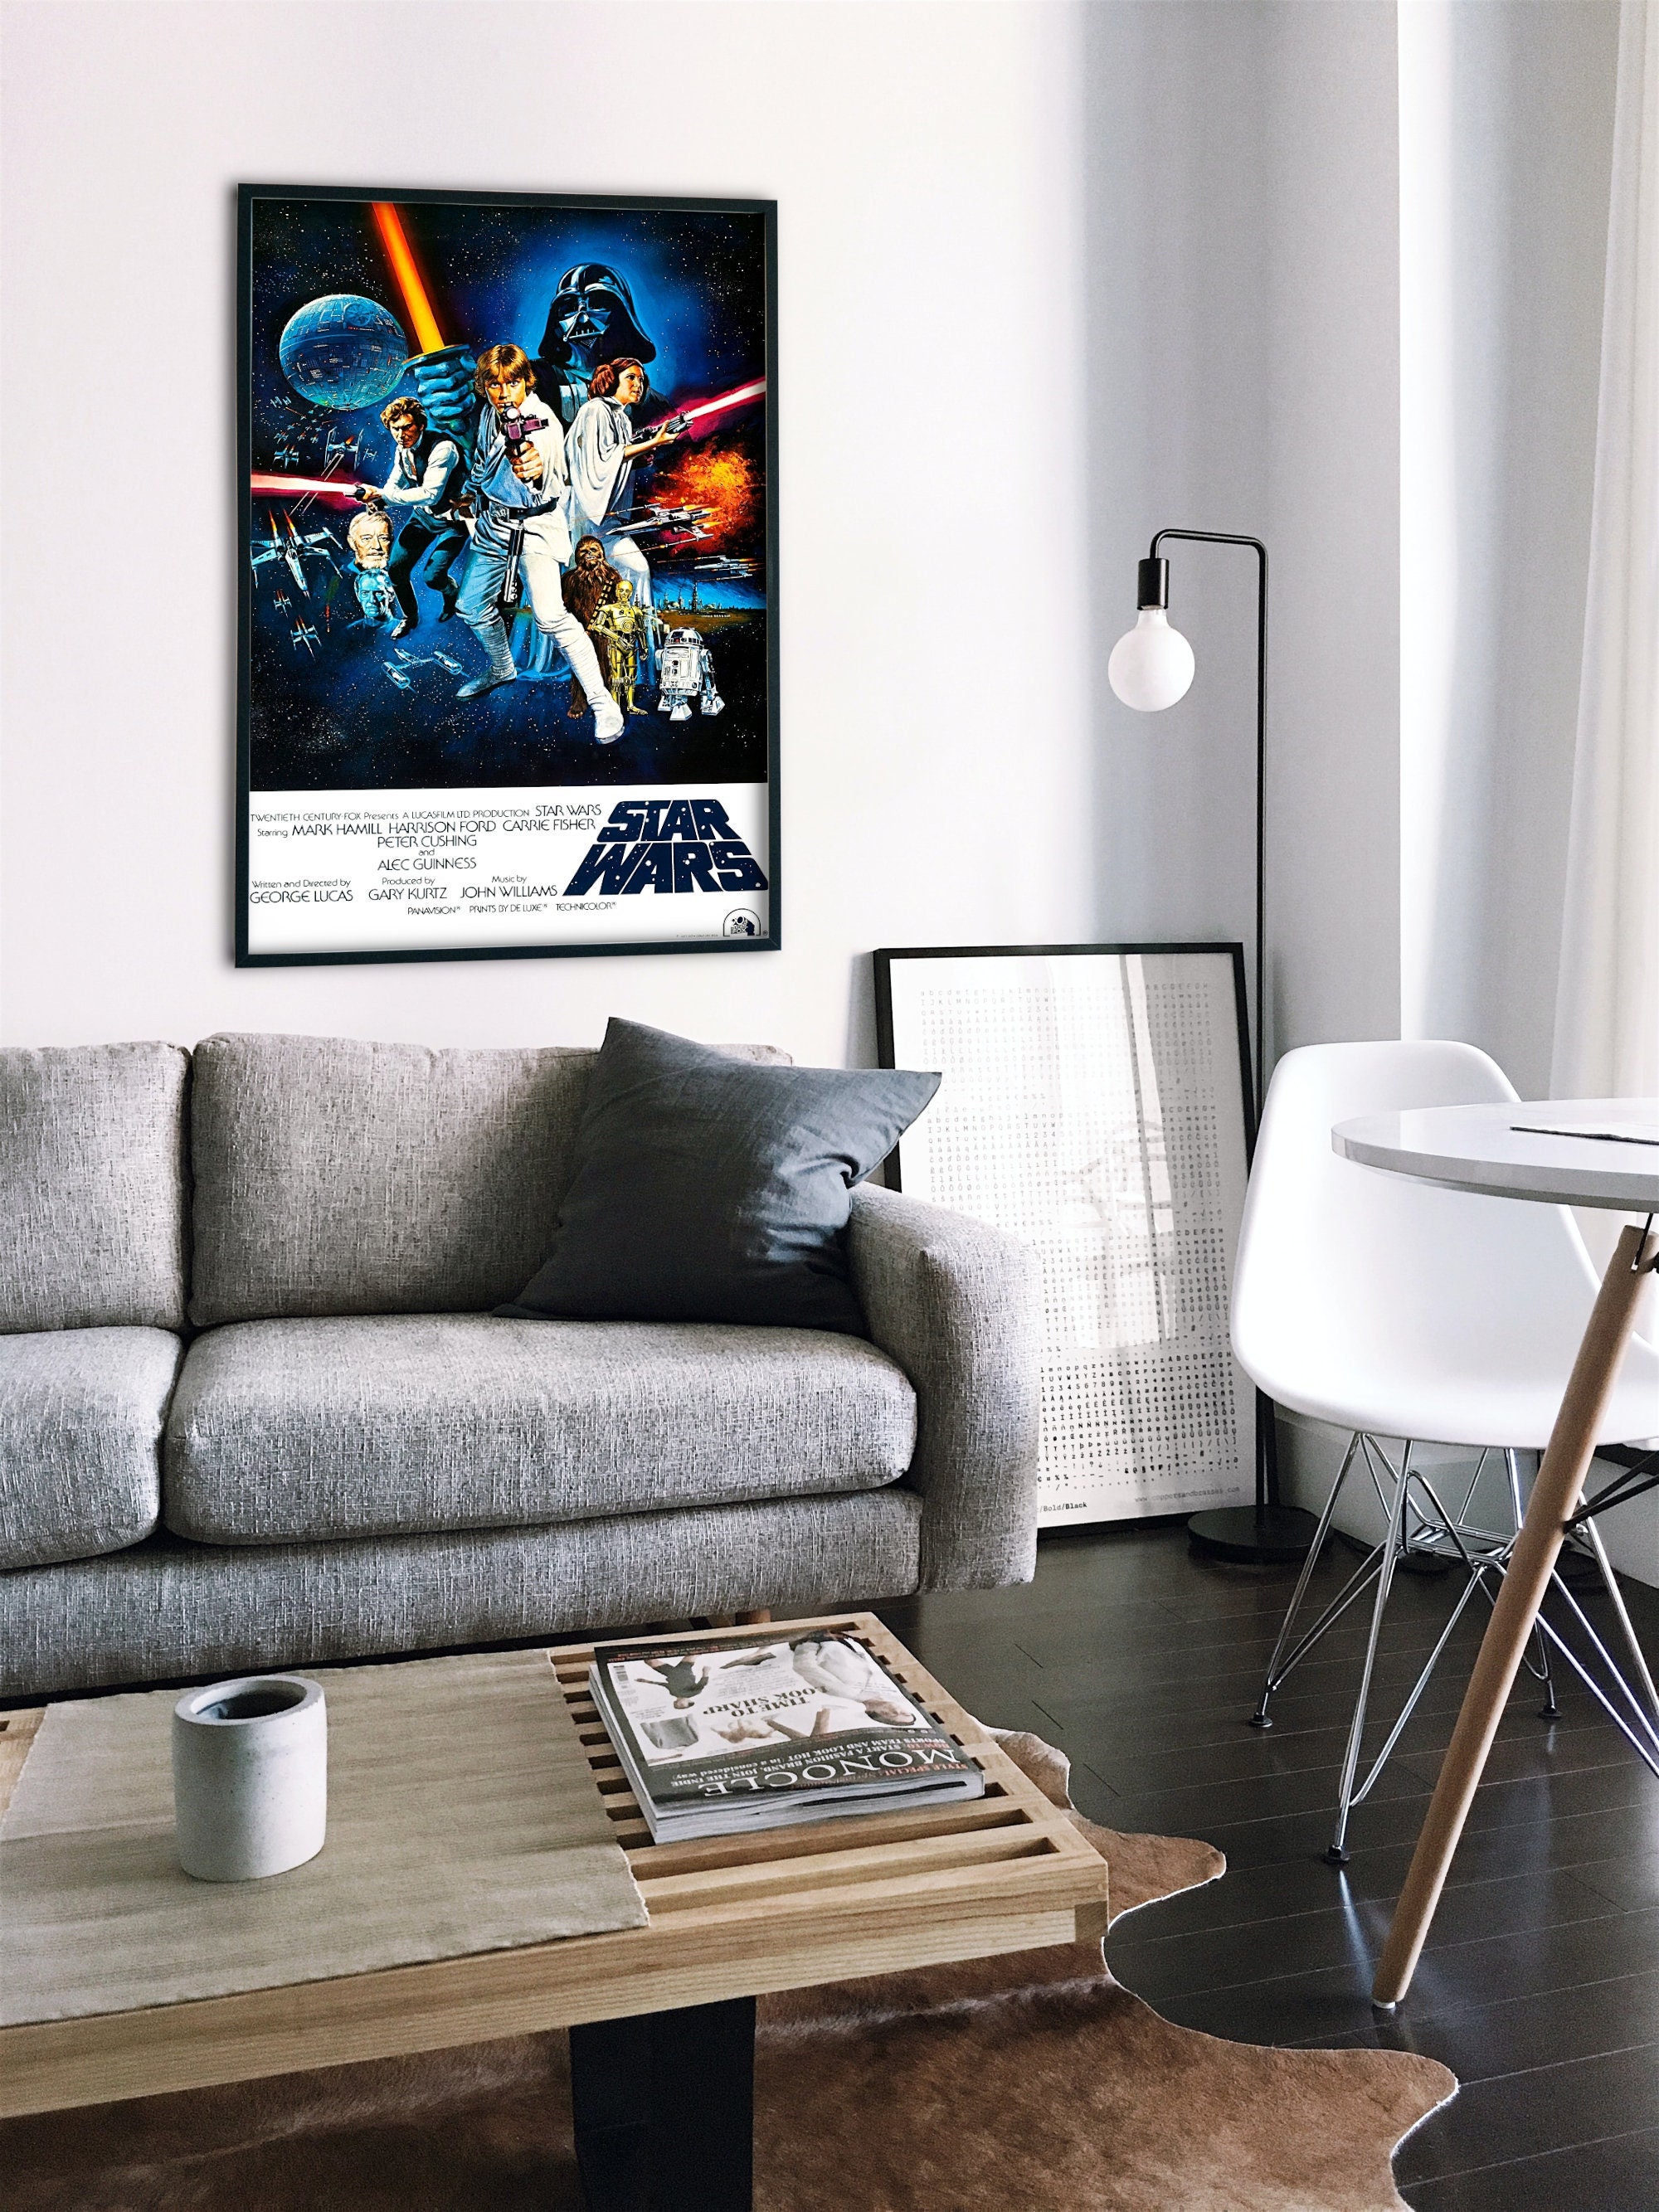 Star Wars New Hope 1977 Movie Vintage Art Wall Indoor Room Poster- POSTER  20x30